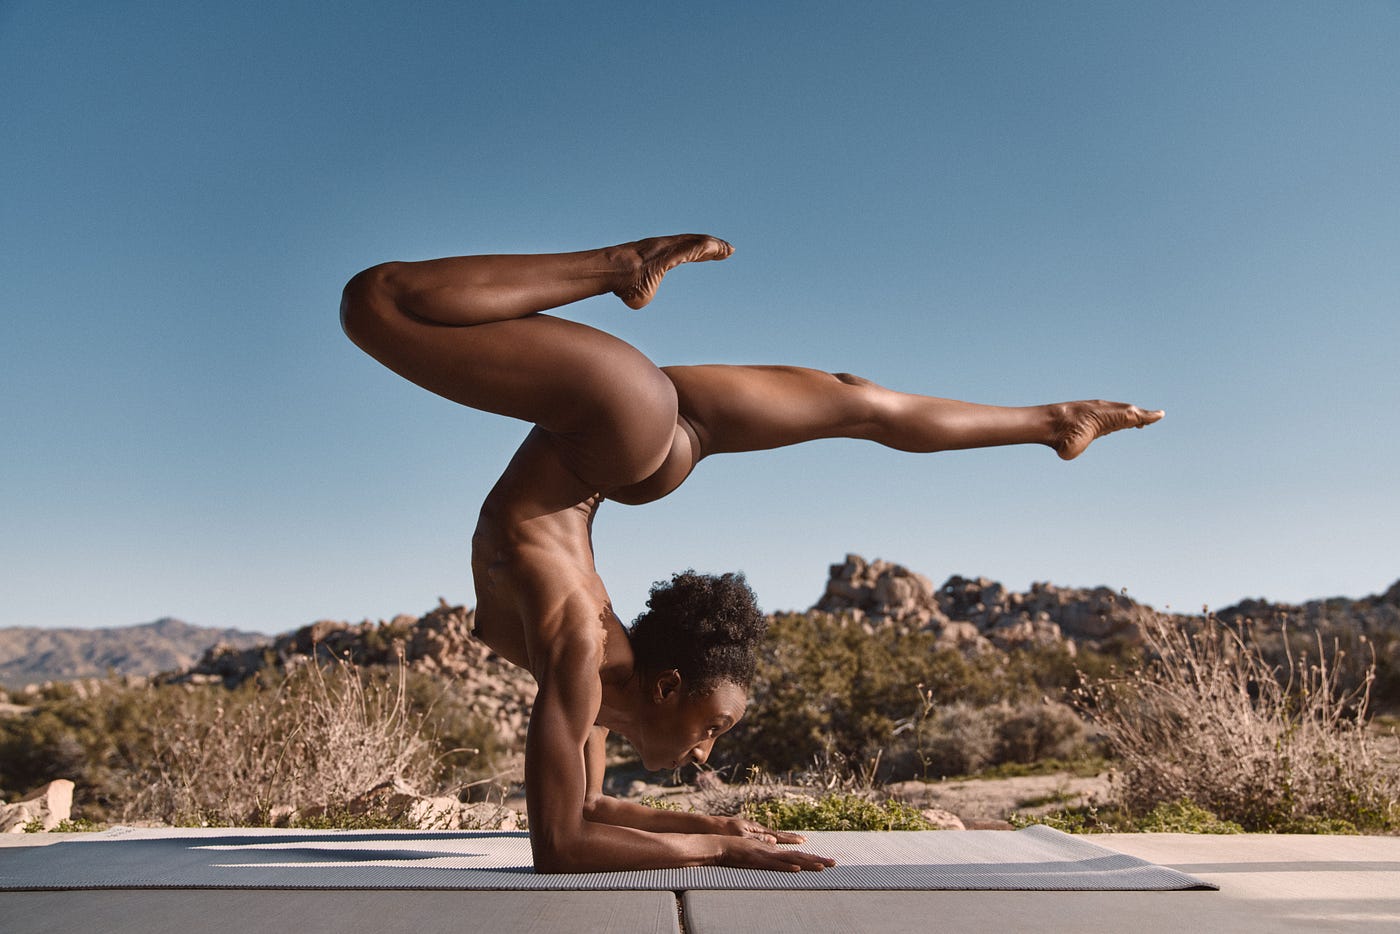 True Naked Yoga. An interview with the website's creator